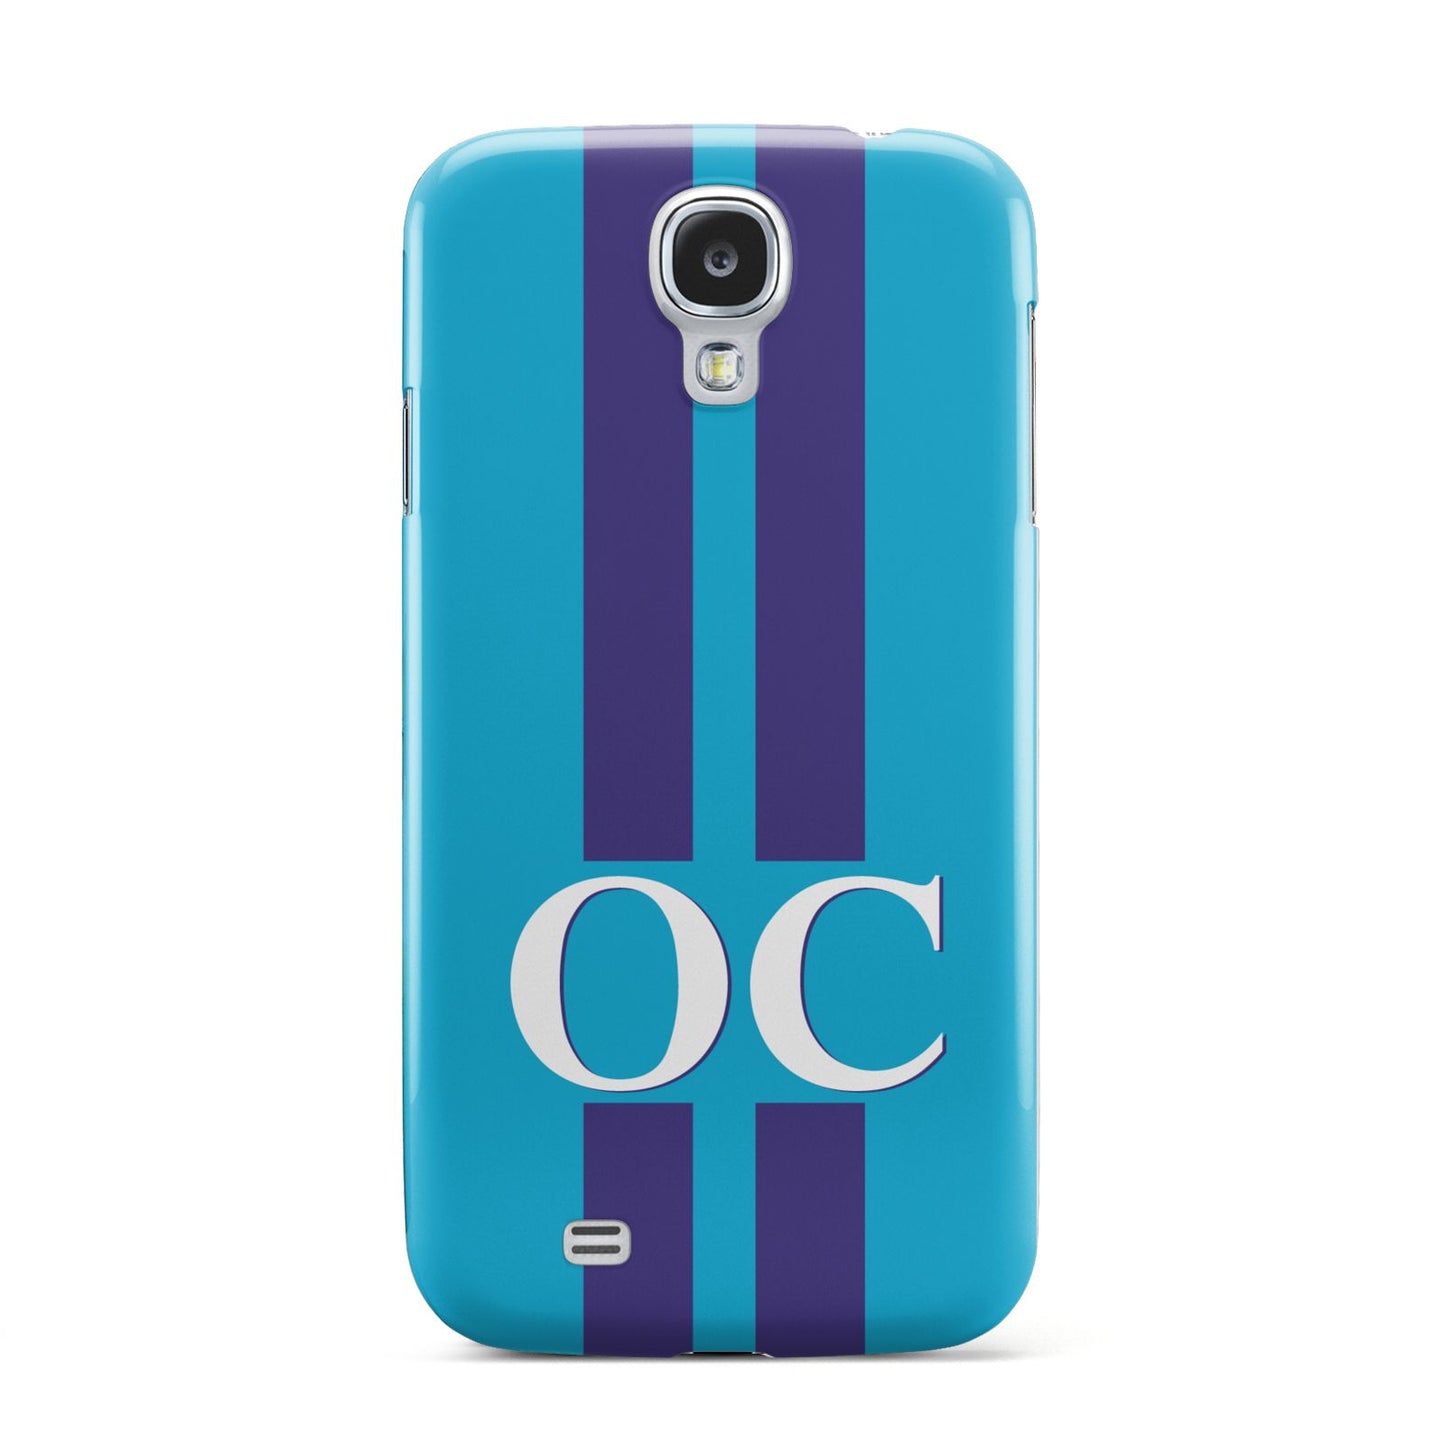 Turquoise Personalised Samsung Galaxy S4 Case